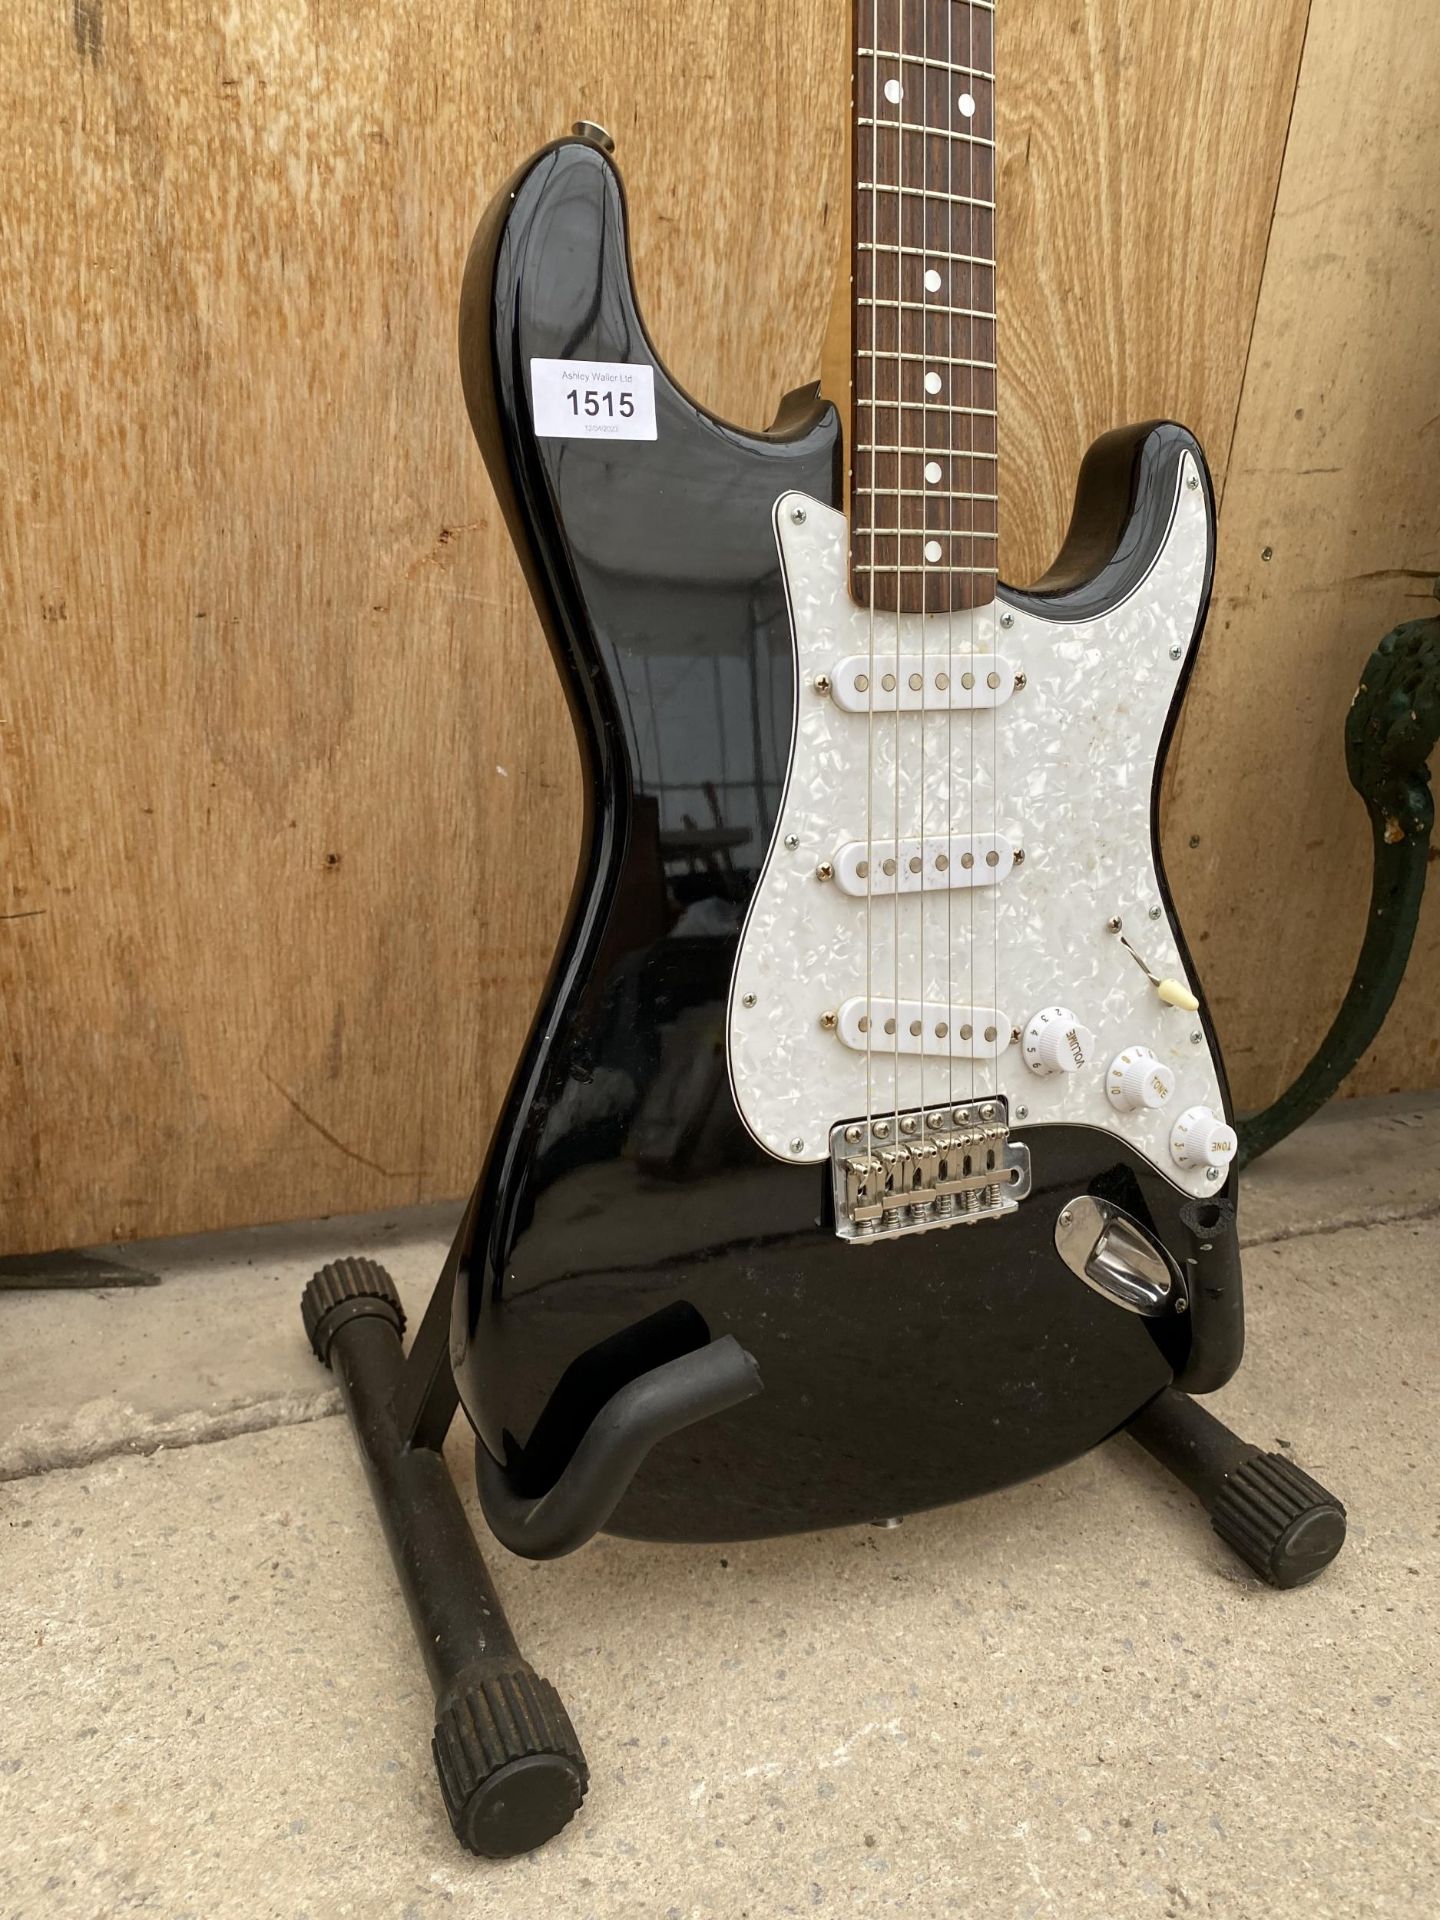 A BLACK SQUIRE STRATOCASTER BY FENDER ELECTRIC GUITAR (SERIAL NUMBER: N006099) - Image 2 of 4